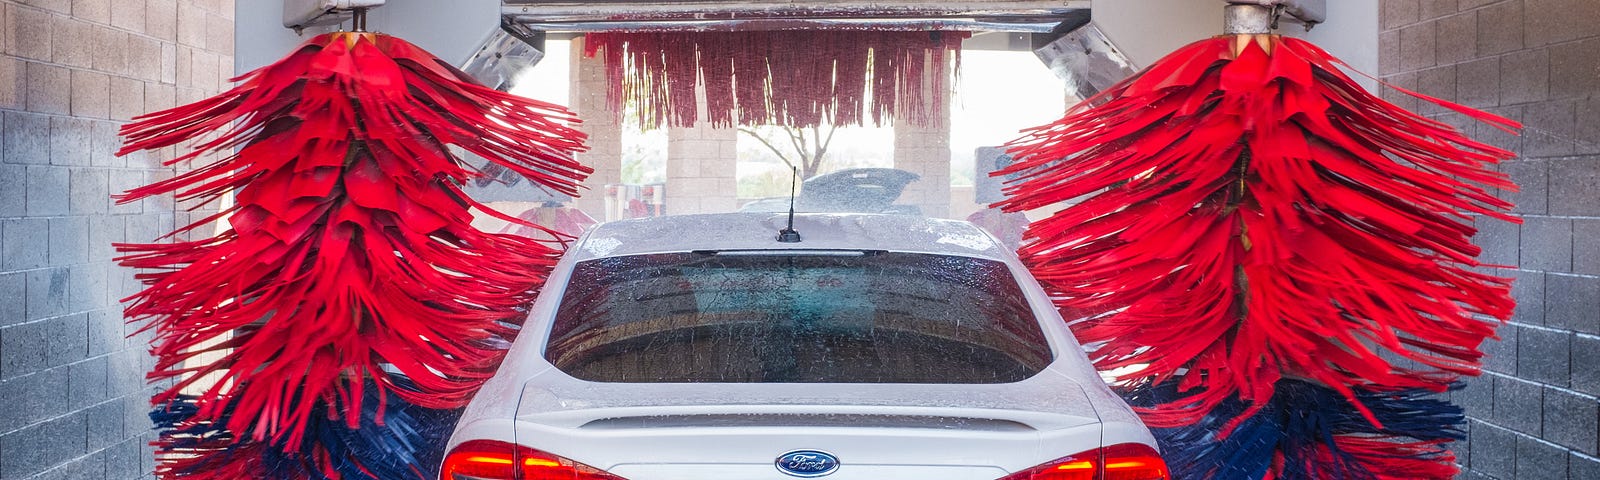 A car embarking on the automatic car wash journey.